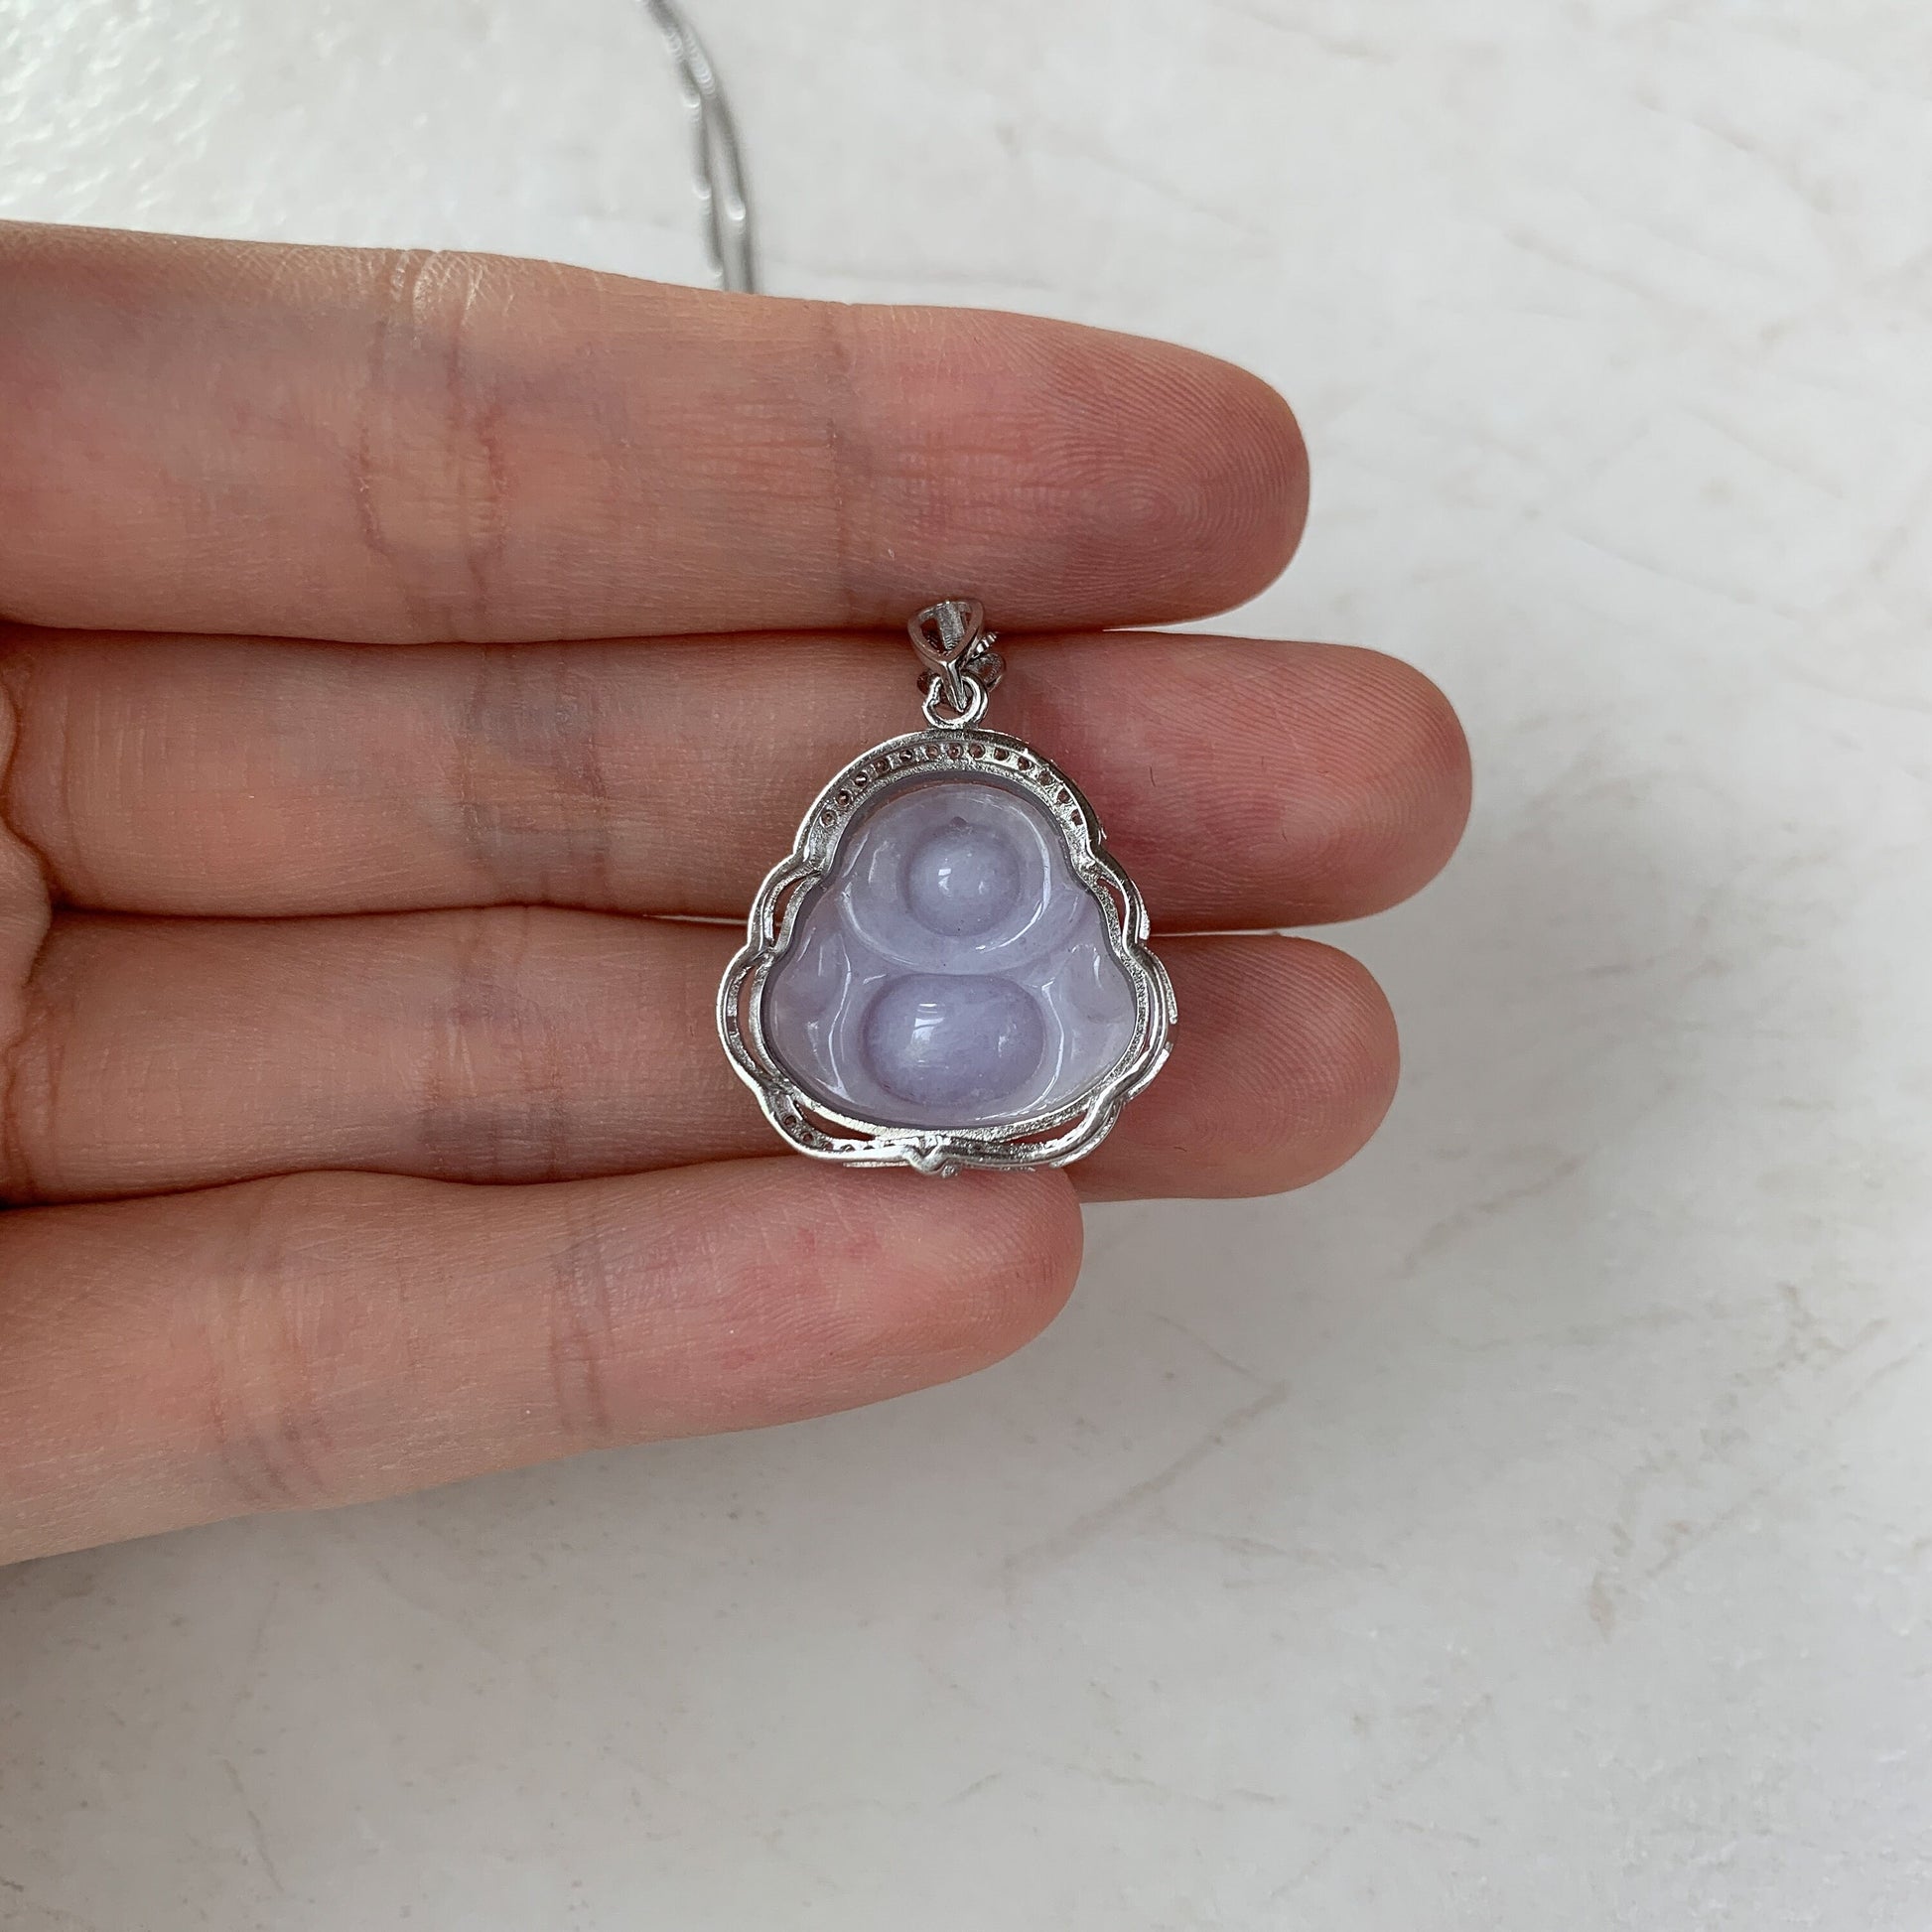 Purple Lavender Jadeite Jade Buddha Carved Pendant Sterling Silver Necklace, CZ-0621-1646867035 - AriaDesignCollection